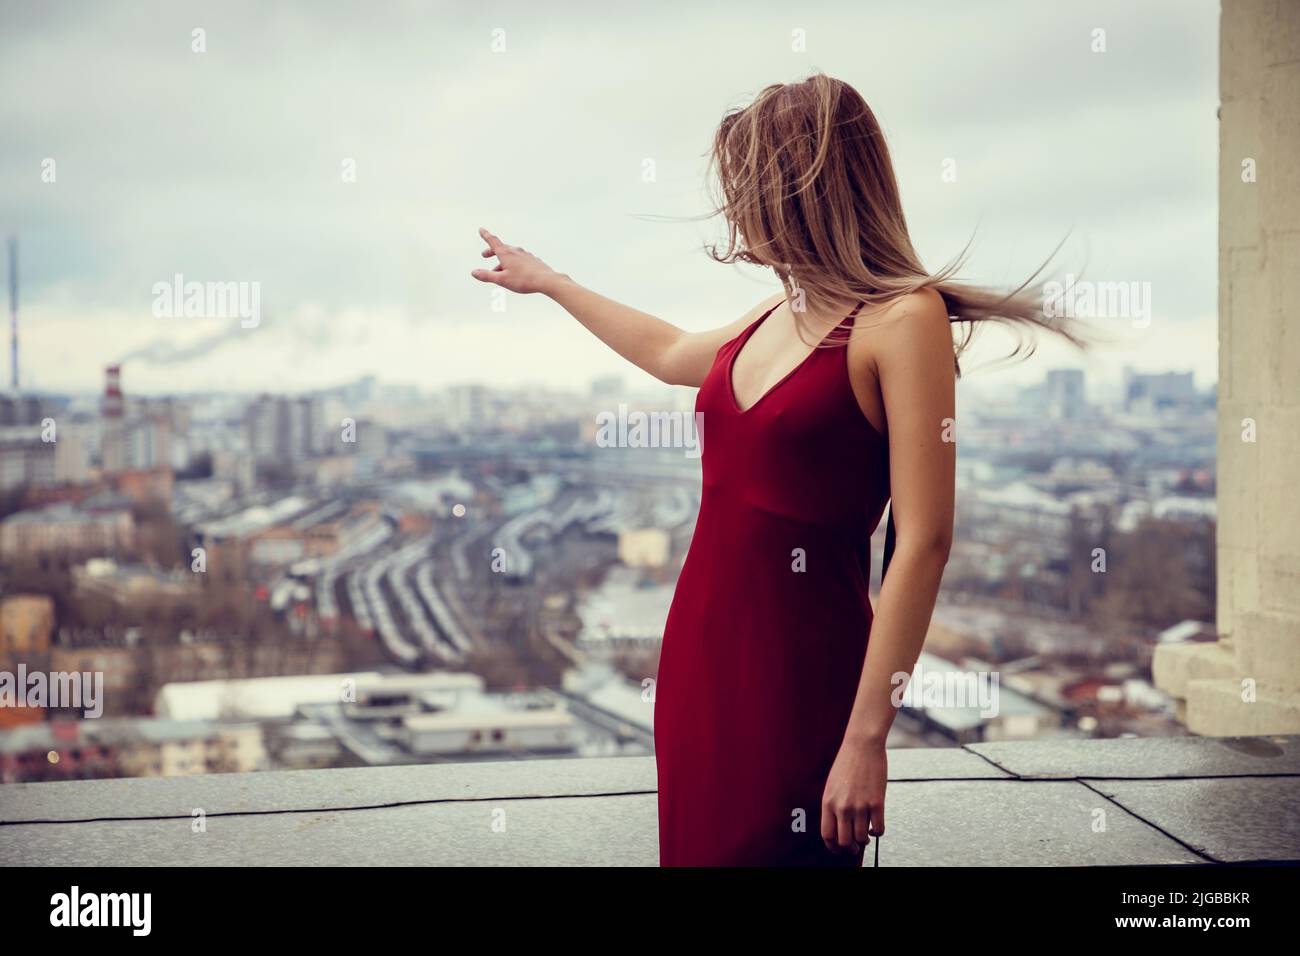 Slim girl in red dress is standing on top of skyscraper, high above the megacity sprawling behind her till the horizon. She points with 1 hand Stock Photo